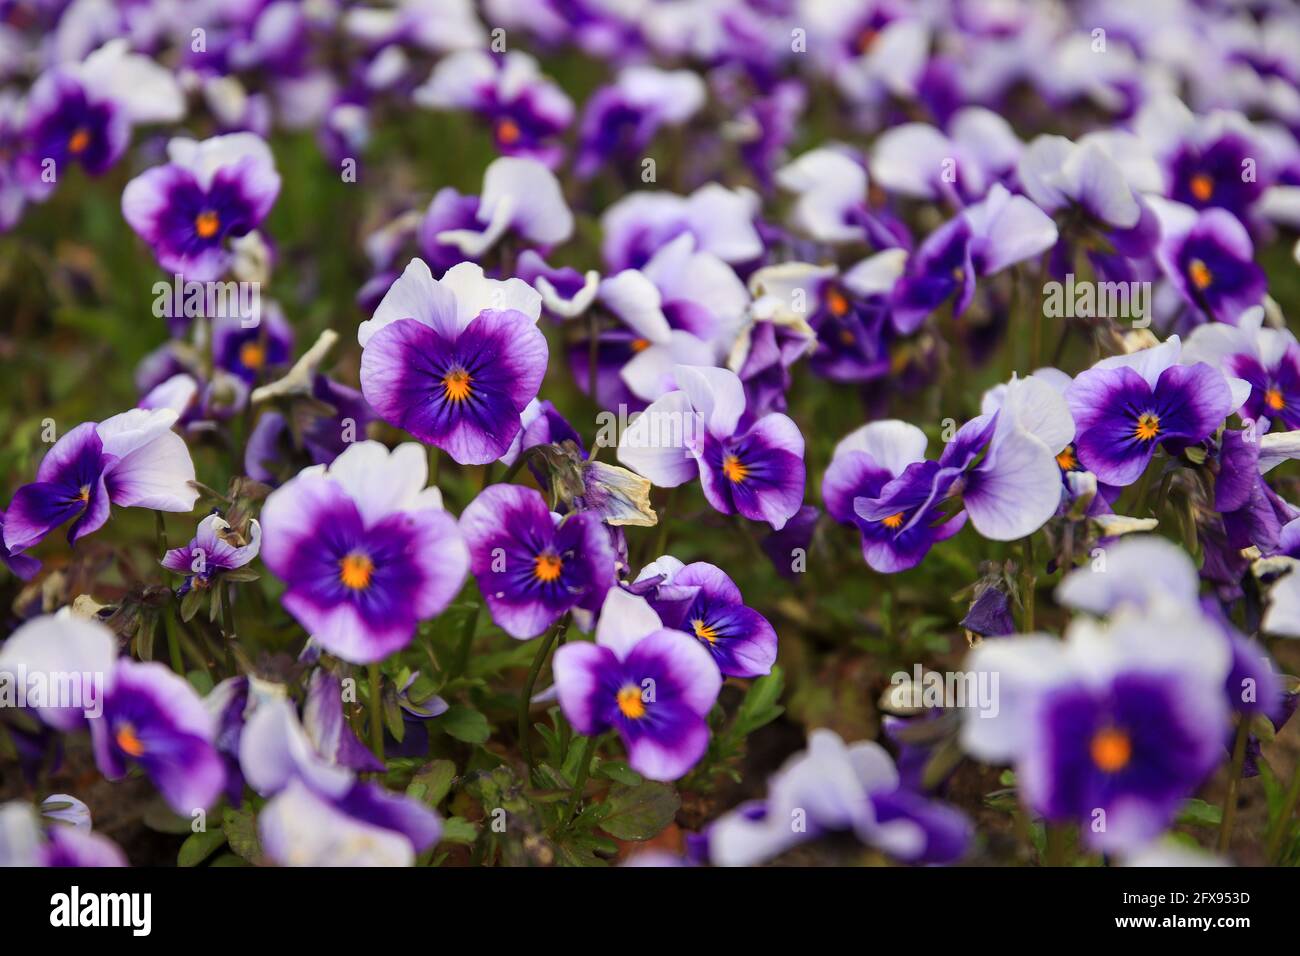 Colorful decoration of blooming flowers. Purple pansy flowers Stock Photo